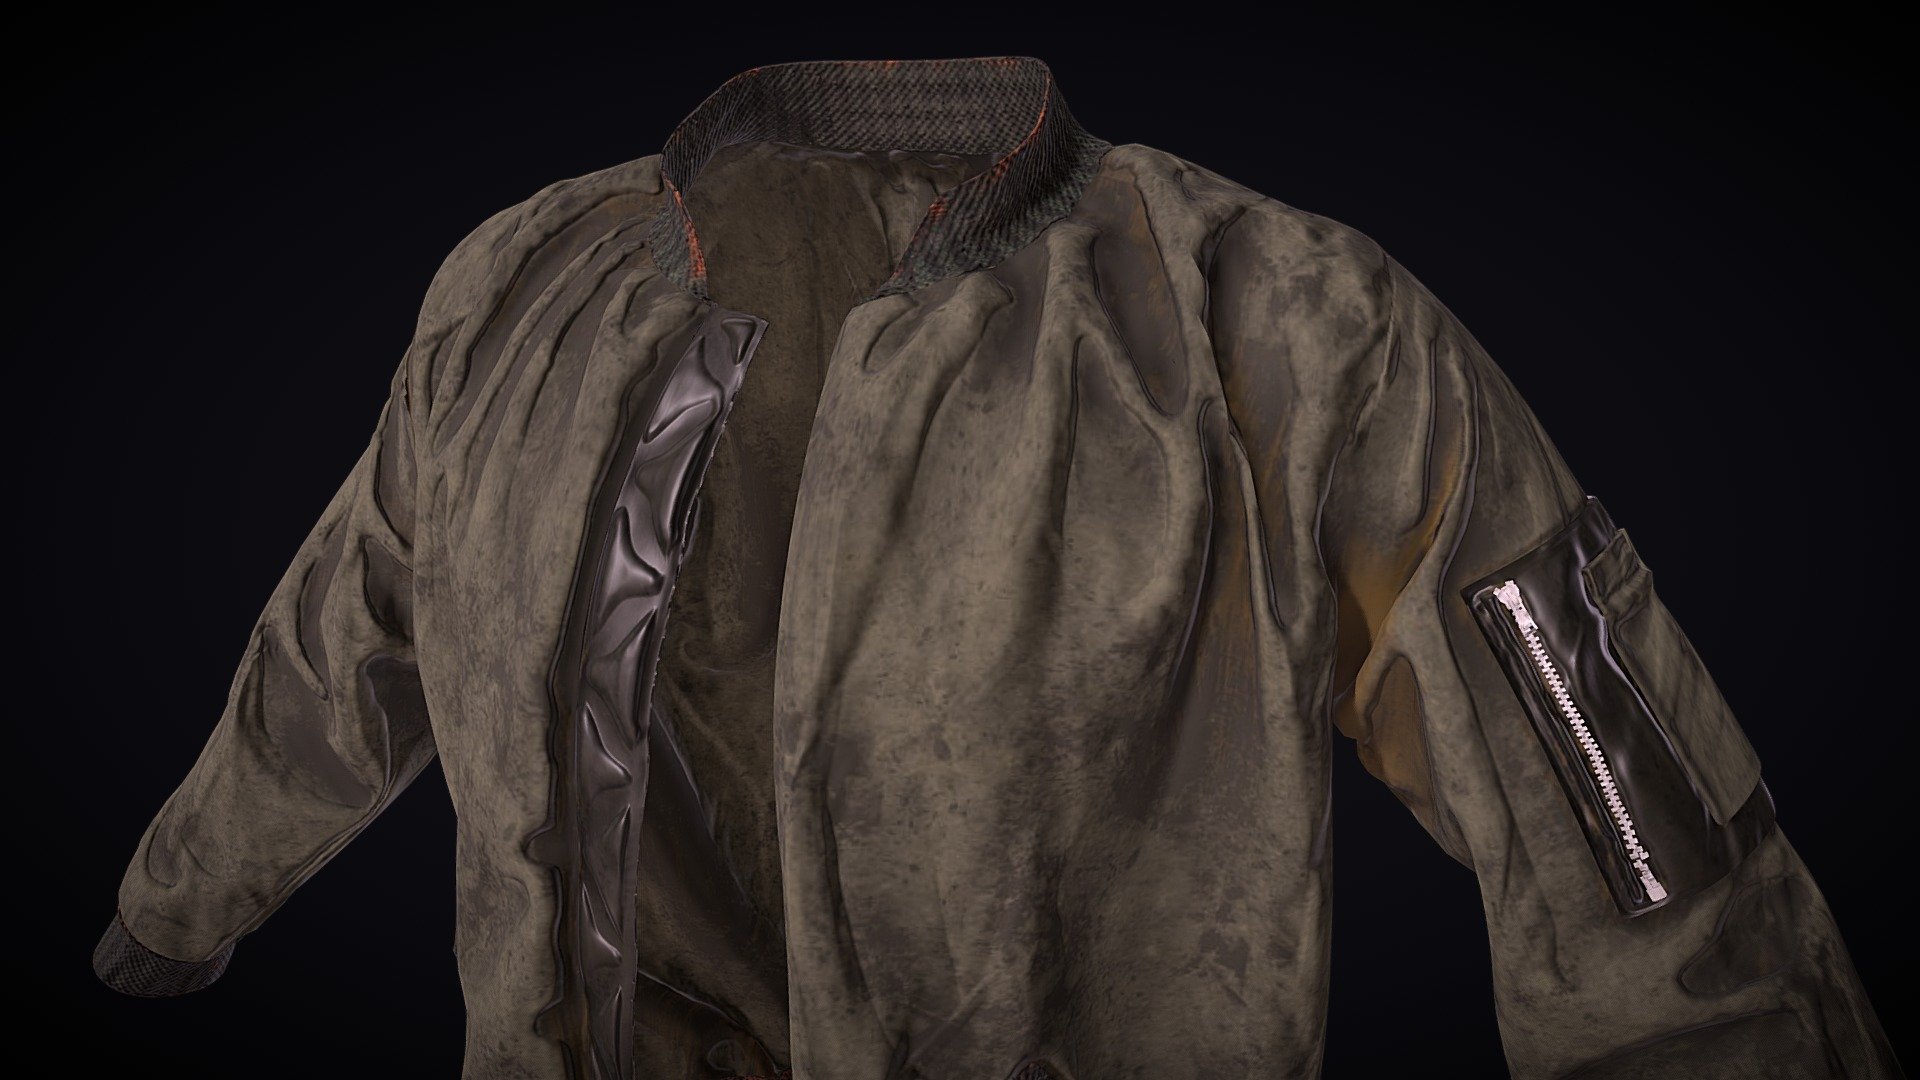 Had a ton of success and fun learning from the various sources for marvelous designer and zbrush clothing techniques I took alot from Mr Davis at Flipped normals - Flight Jacket - 3D model by [IndigoFlash] (@indigoflashphotography) 3d model